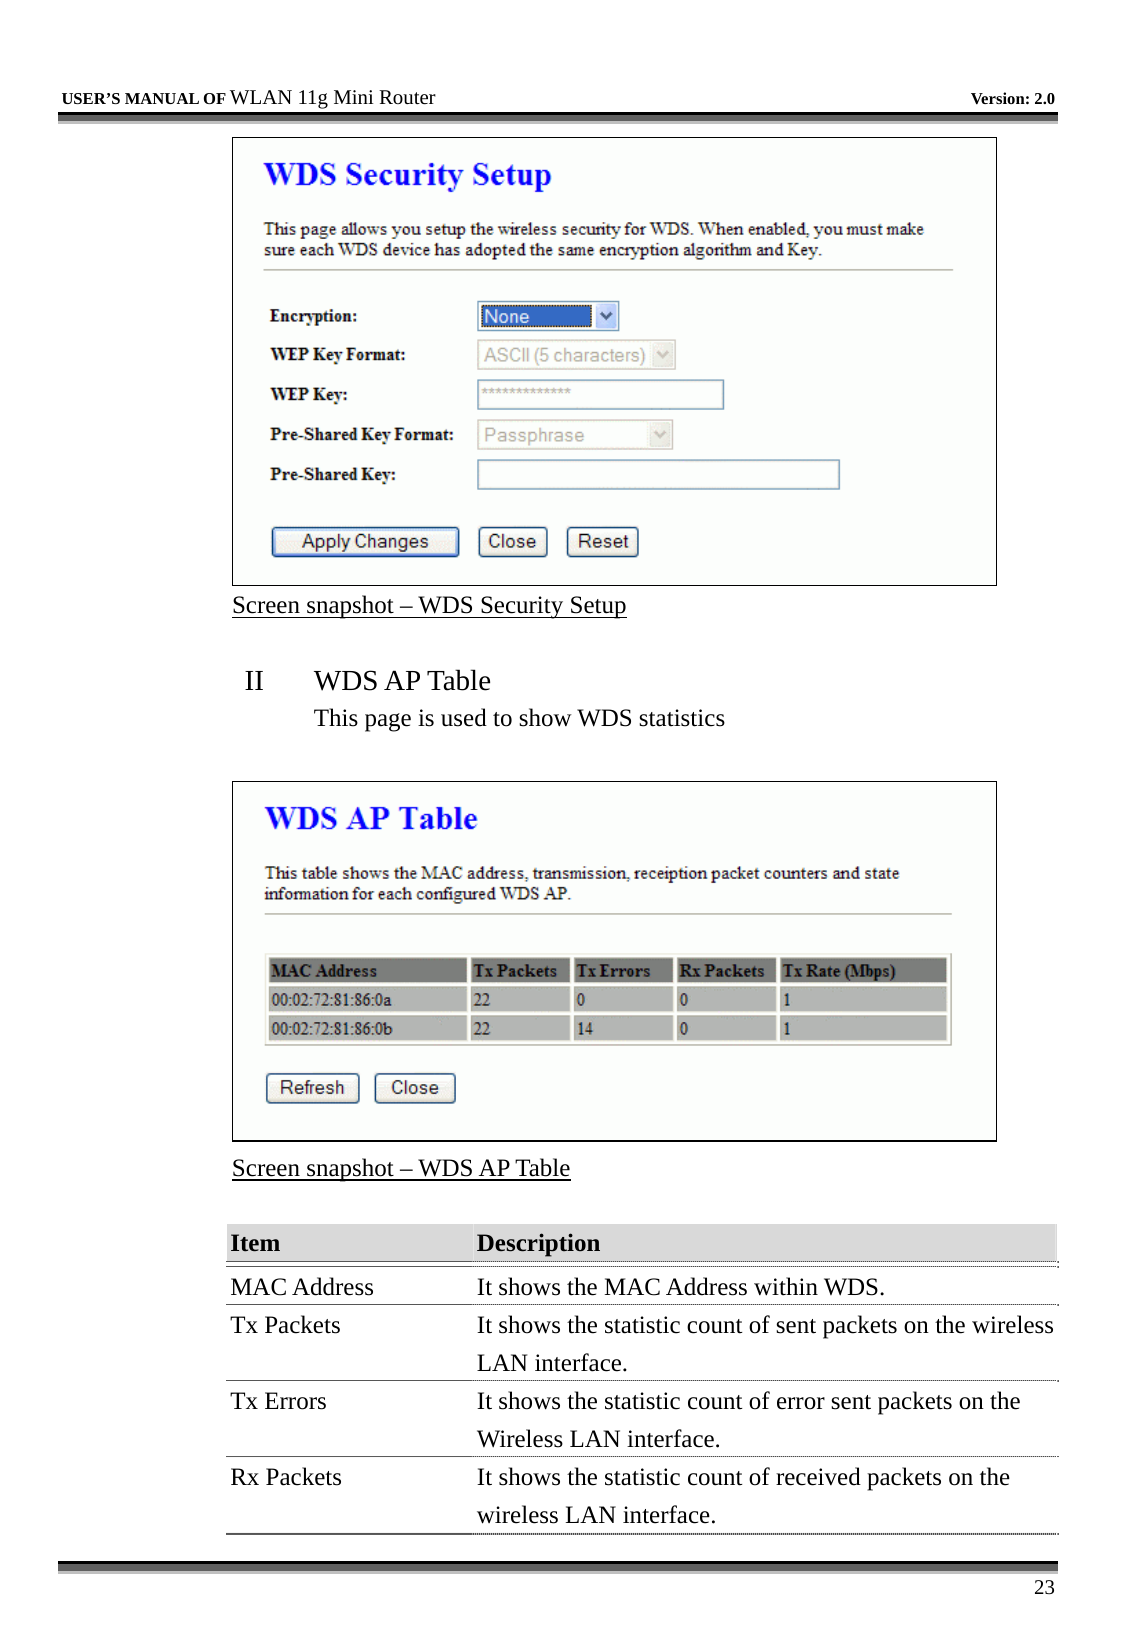   USER’S MANUAL OF WLAN 11g Mini Router   Version: 2.0     23  Screen snapshot – WDS Security Setup  II WDS AP Table This page is used to show WDS statistics   Screen snapshot – WDS AP Table  Item  Description   MAC Address  It shows the MAC Address within WDS. Tx Packets  It shows the statistic count of sent packets on the wireless LAN interface. Tx Errors  It shows the statistic count of error sent packets on the Wireless LAN interface. Rx Packets  It shows the statistic count of received packets on the wireless LAN interface. 